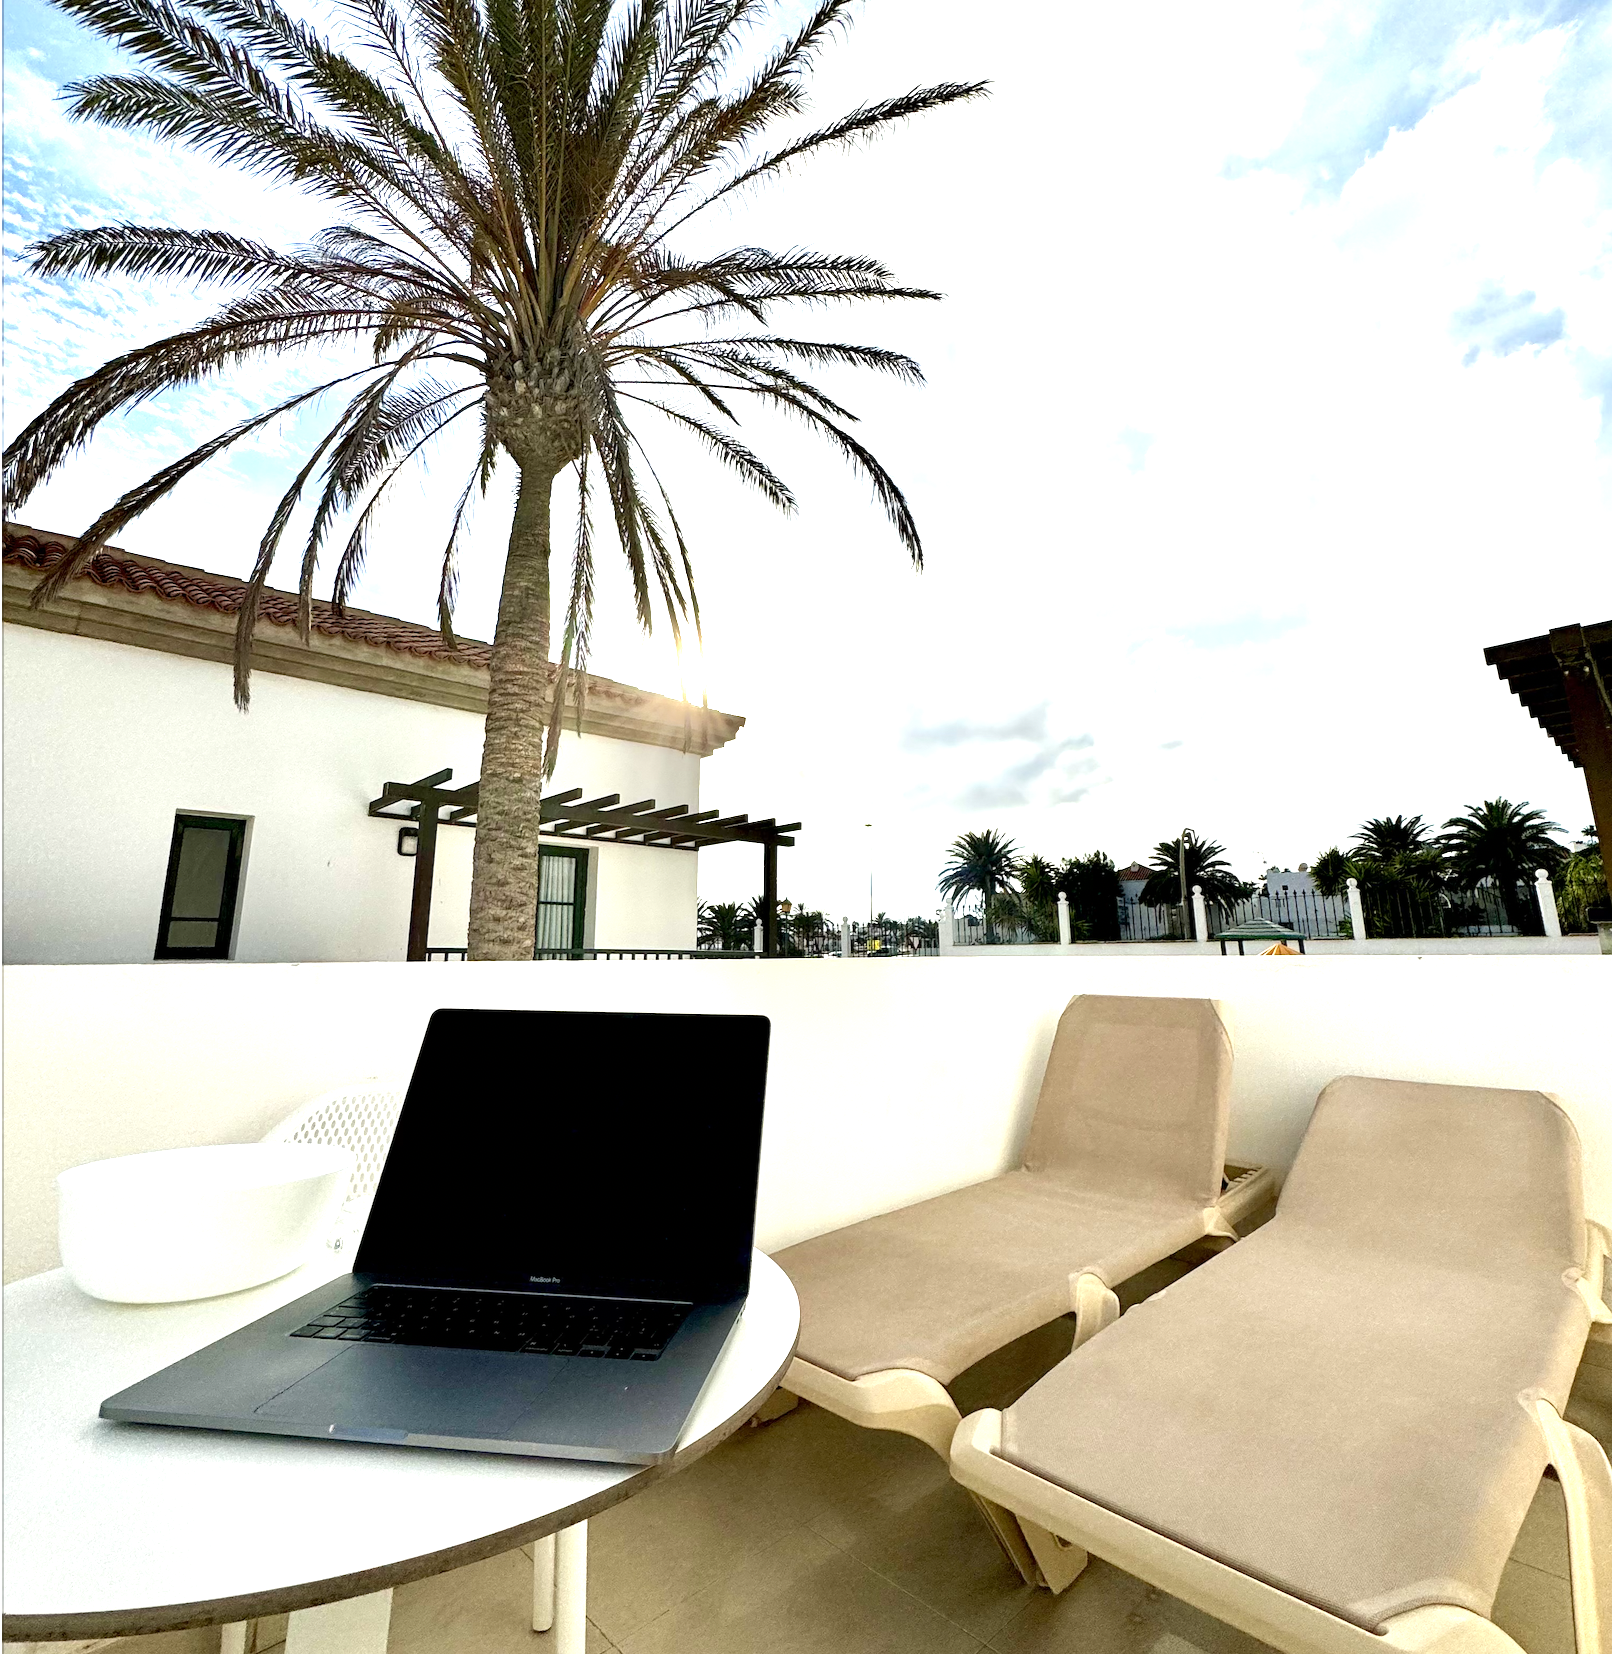 a laptop on a table with chairs and a palm tree